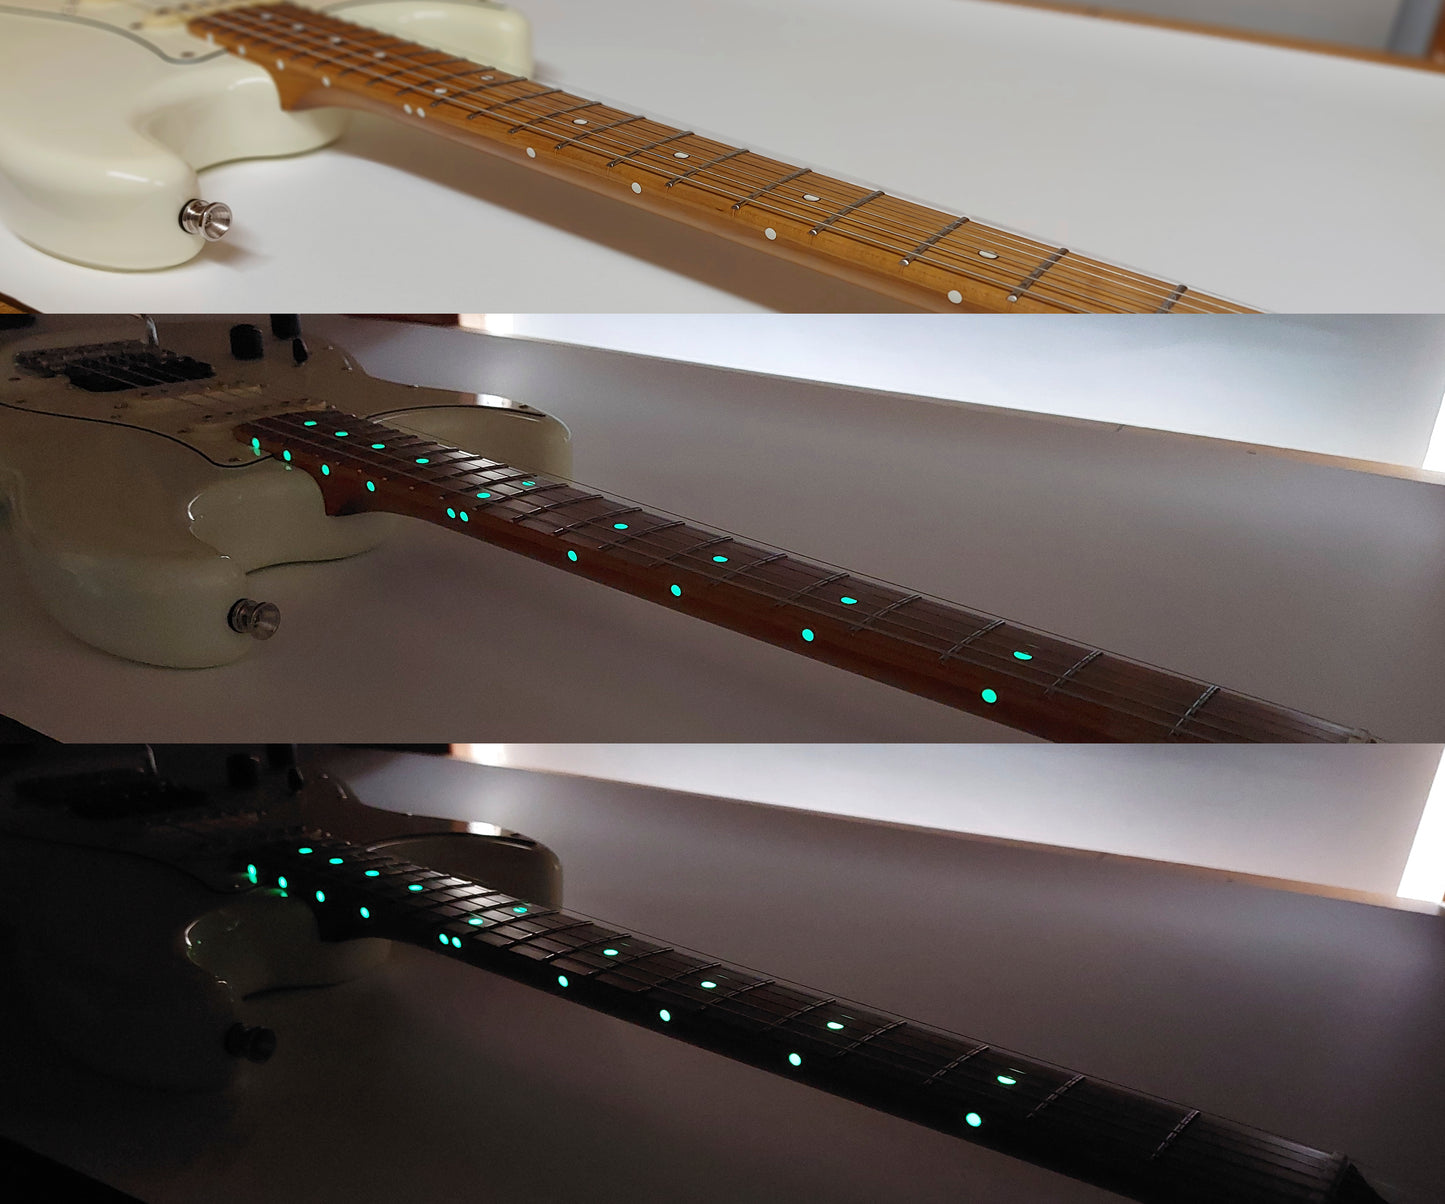 Luminous Vinyl Side Dots and Fret Markers Glow in the Dark Decal Stickers for Guitars & Basses and other Musical Instruments